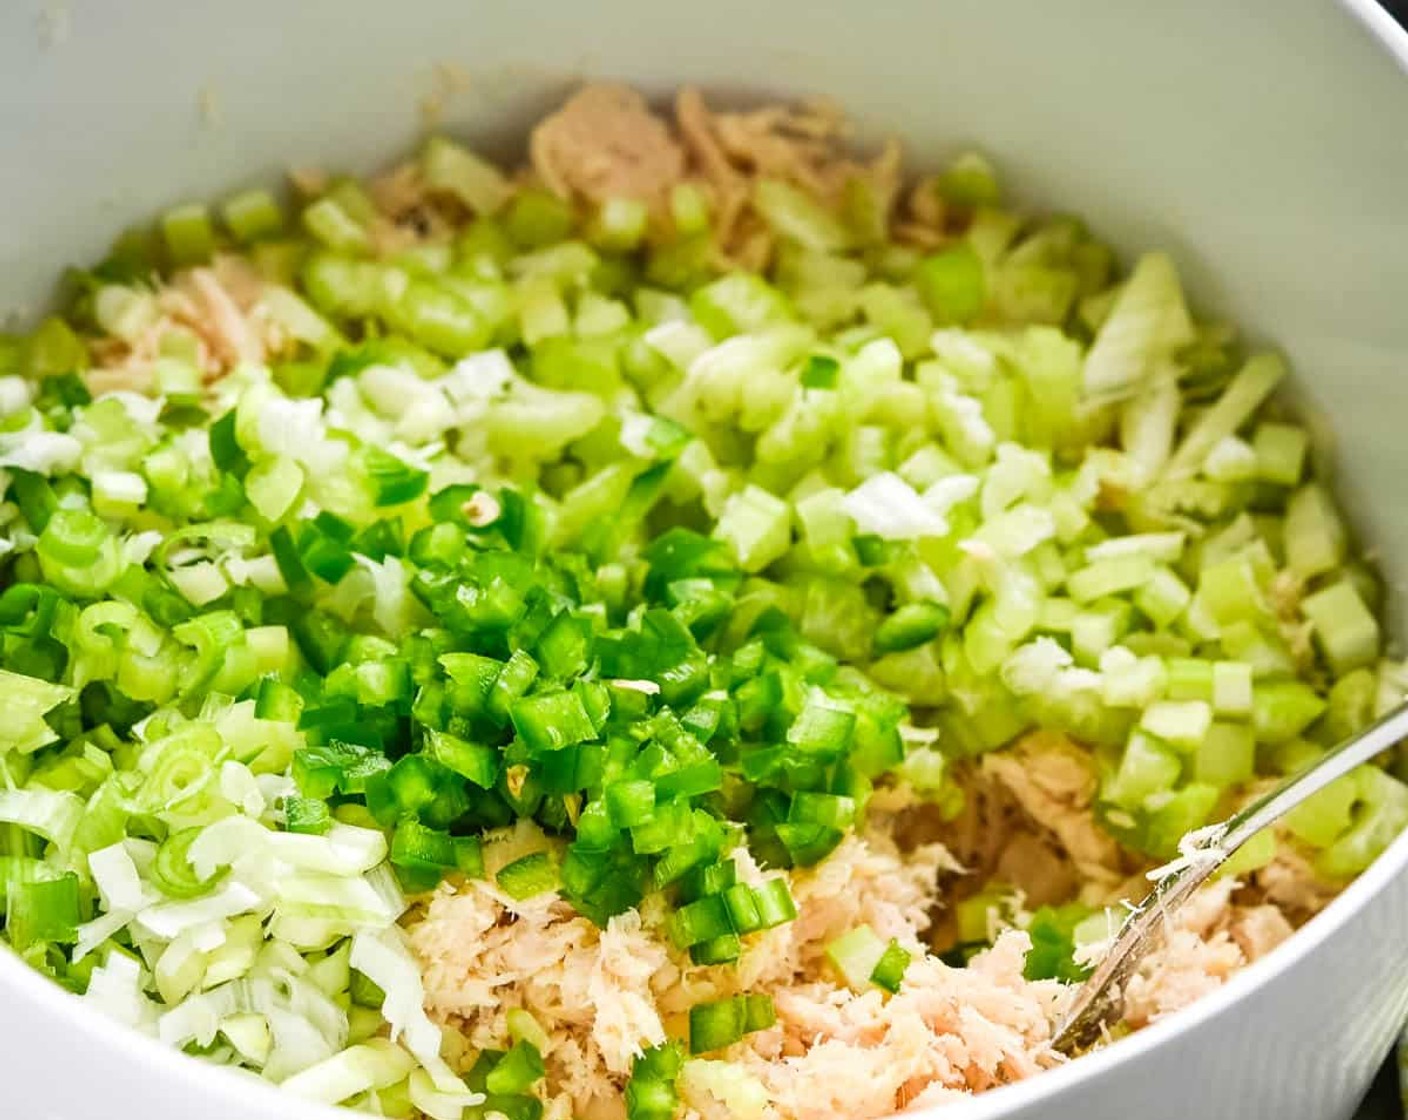 step 1 Add the Canned Tuna in Water (4 cans) to a medium bowl and break it apart with a fork. Add the chopped Celery (2 stalks), Scallion (1 bunch), and Jalapeño Pepper (1) to the tuna and toss to combine.